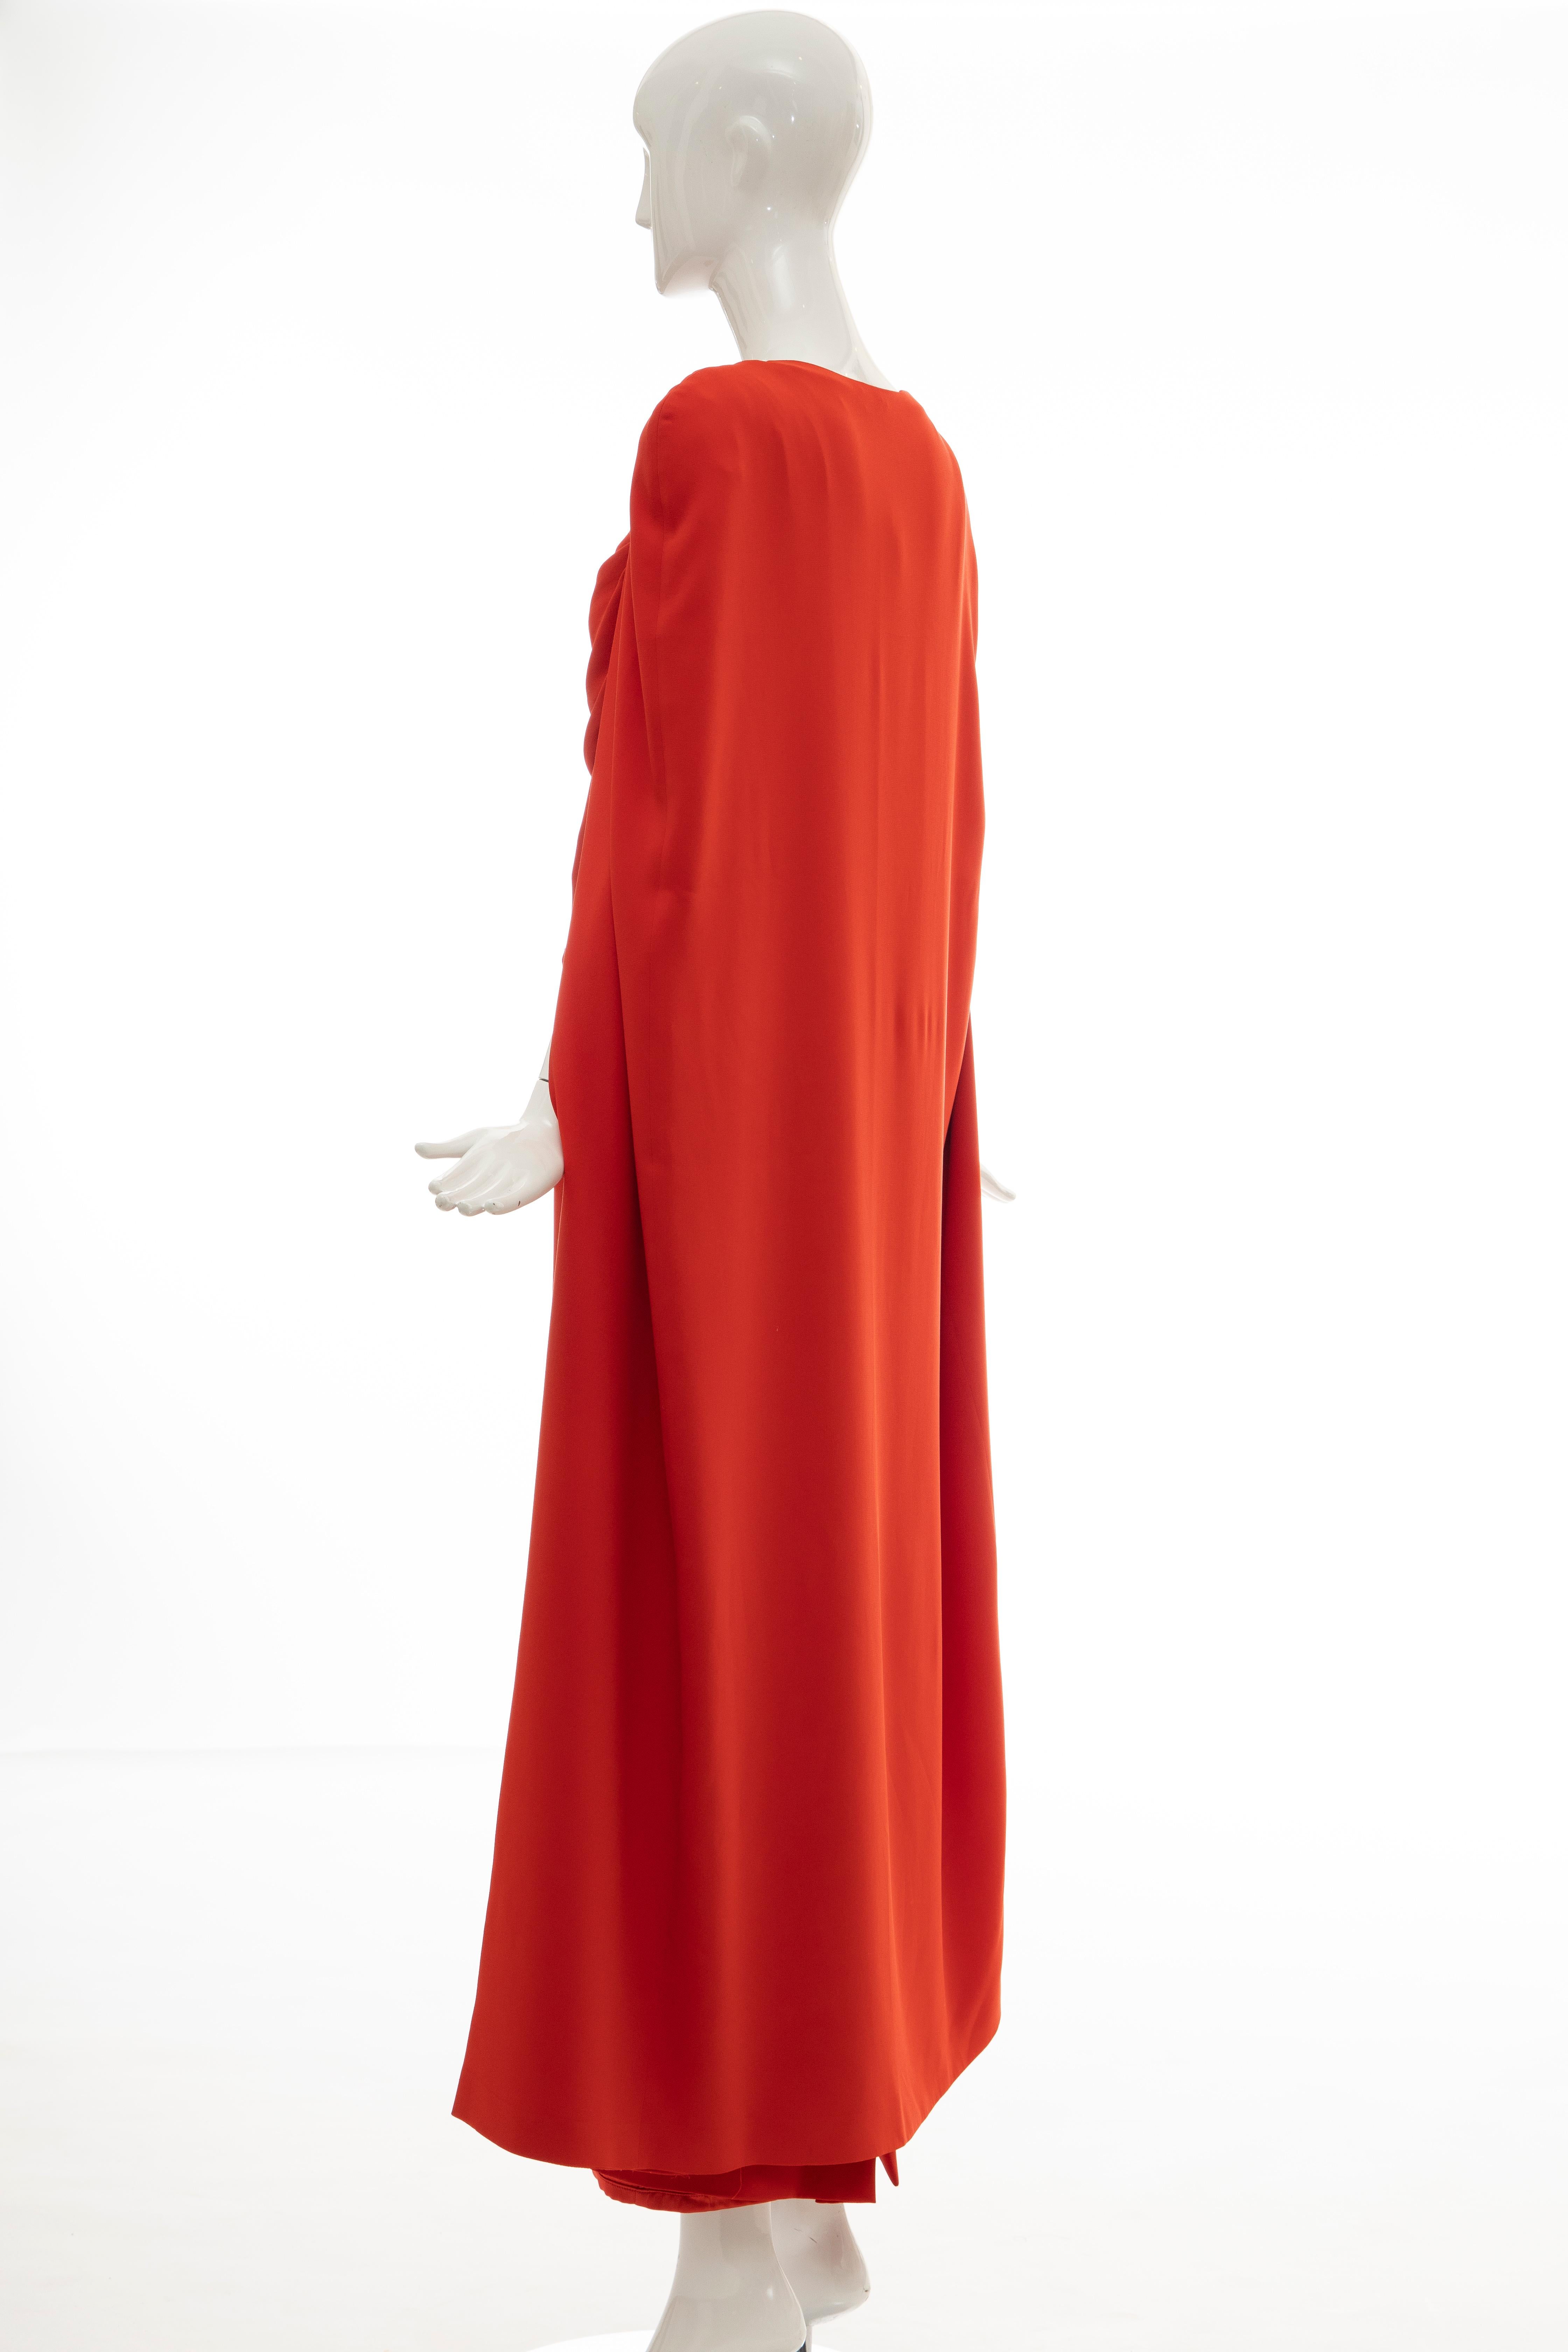 Tom Ford Runway Silk Persimmon Evening Dress With Cape, Fall 2012 3